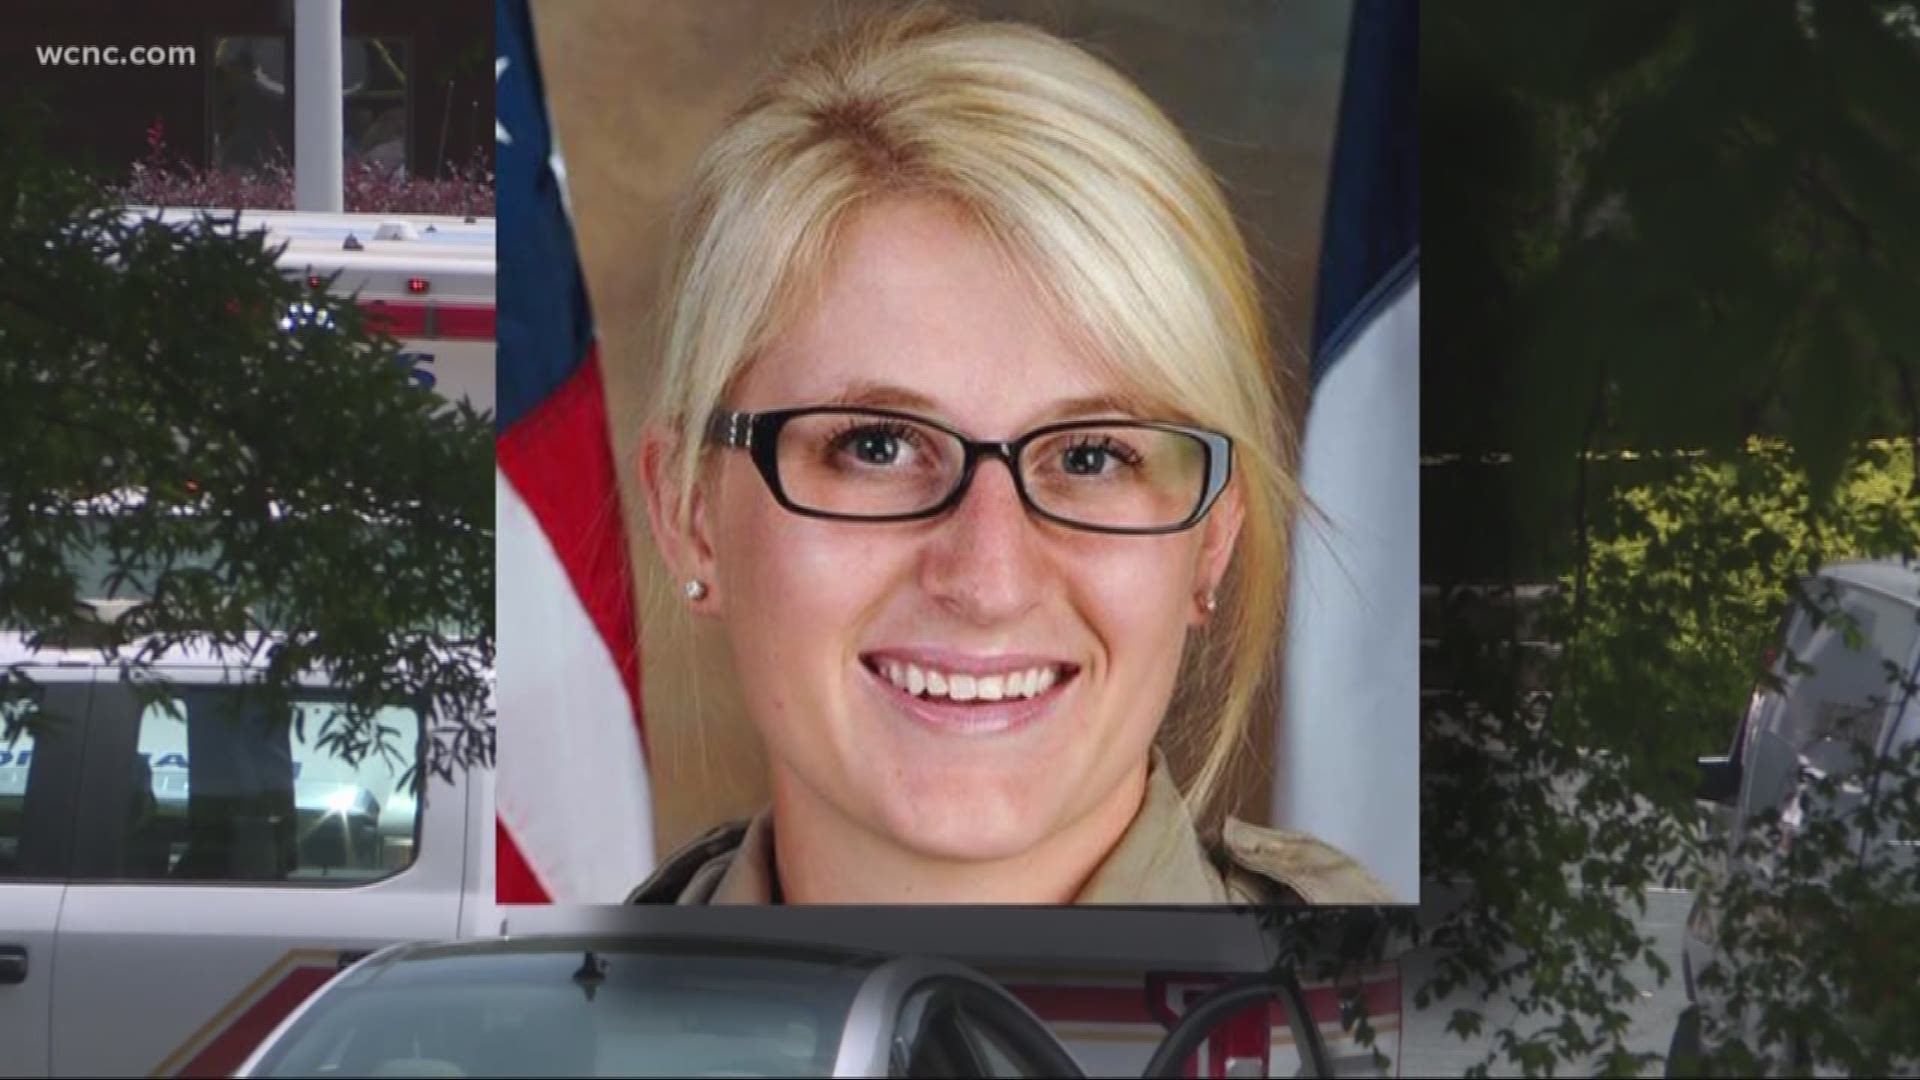 The Gaston County Sheriff's Office is mourning the loss of one of its own Sunday afternoon. Deputy Katelyn Self was killed in the Bessemer City restaurant incident.